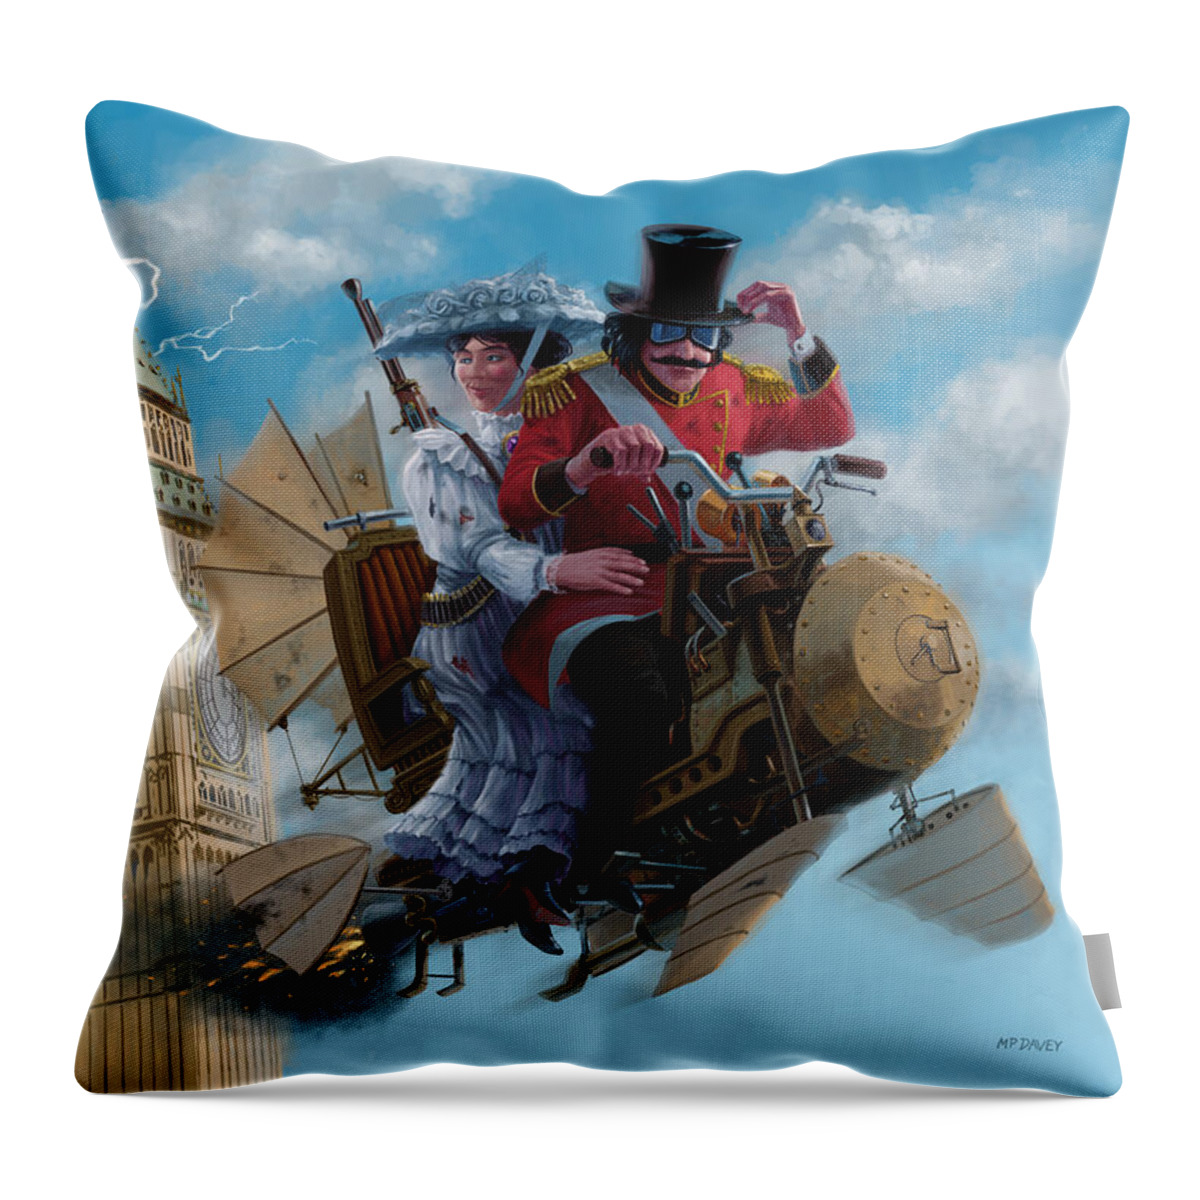 Steam Punk Throw Pillow featuring the digital art Steampunk escape from attack of Big Ben foe by Martin Davey